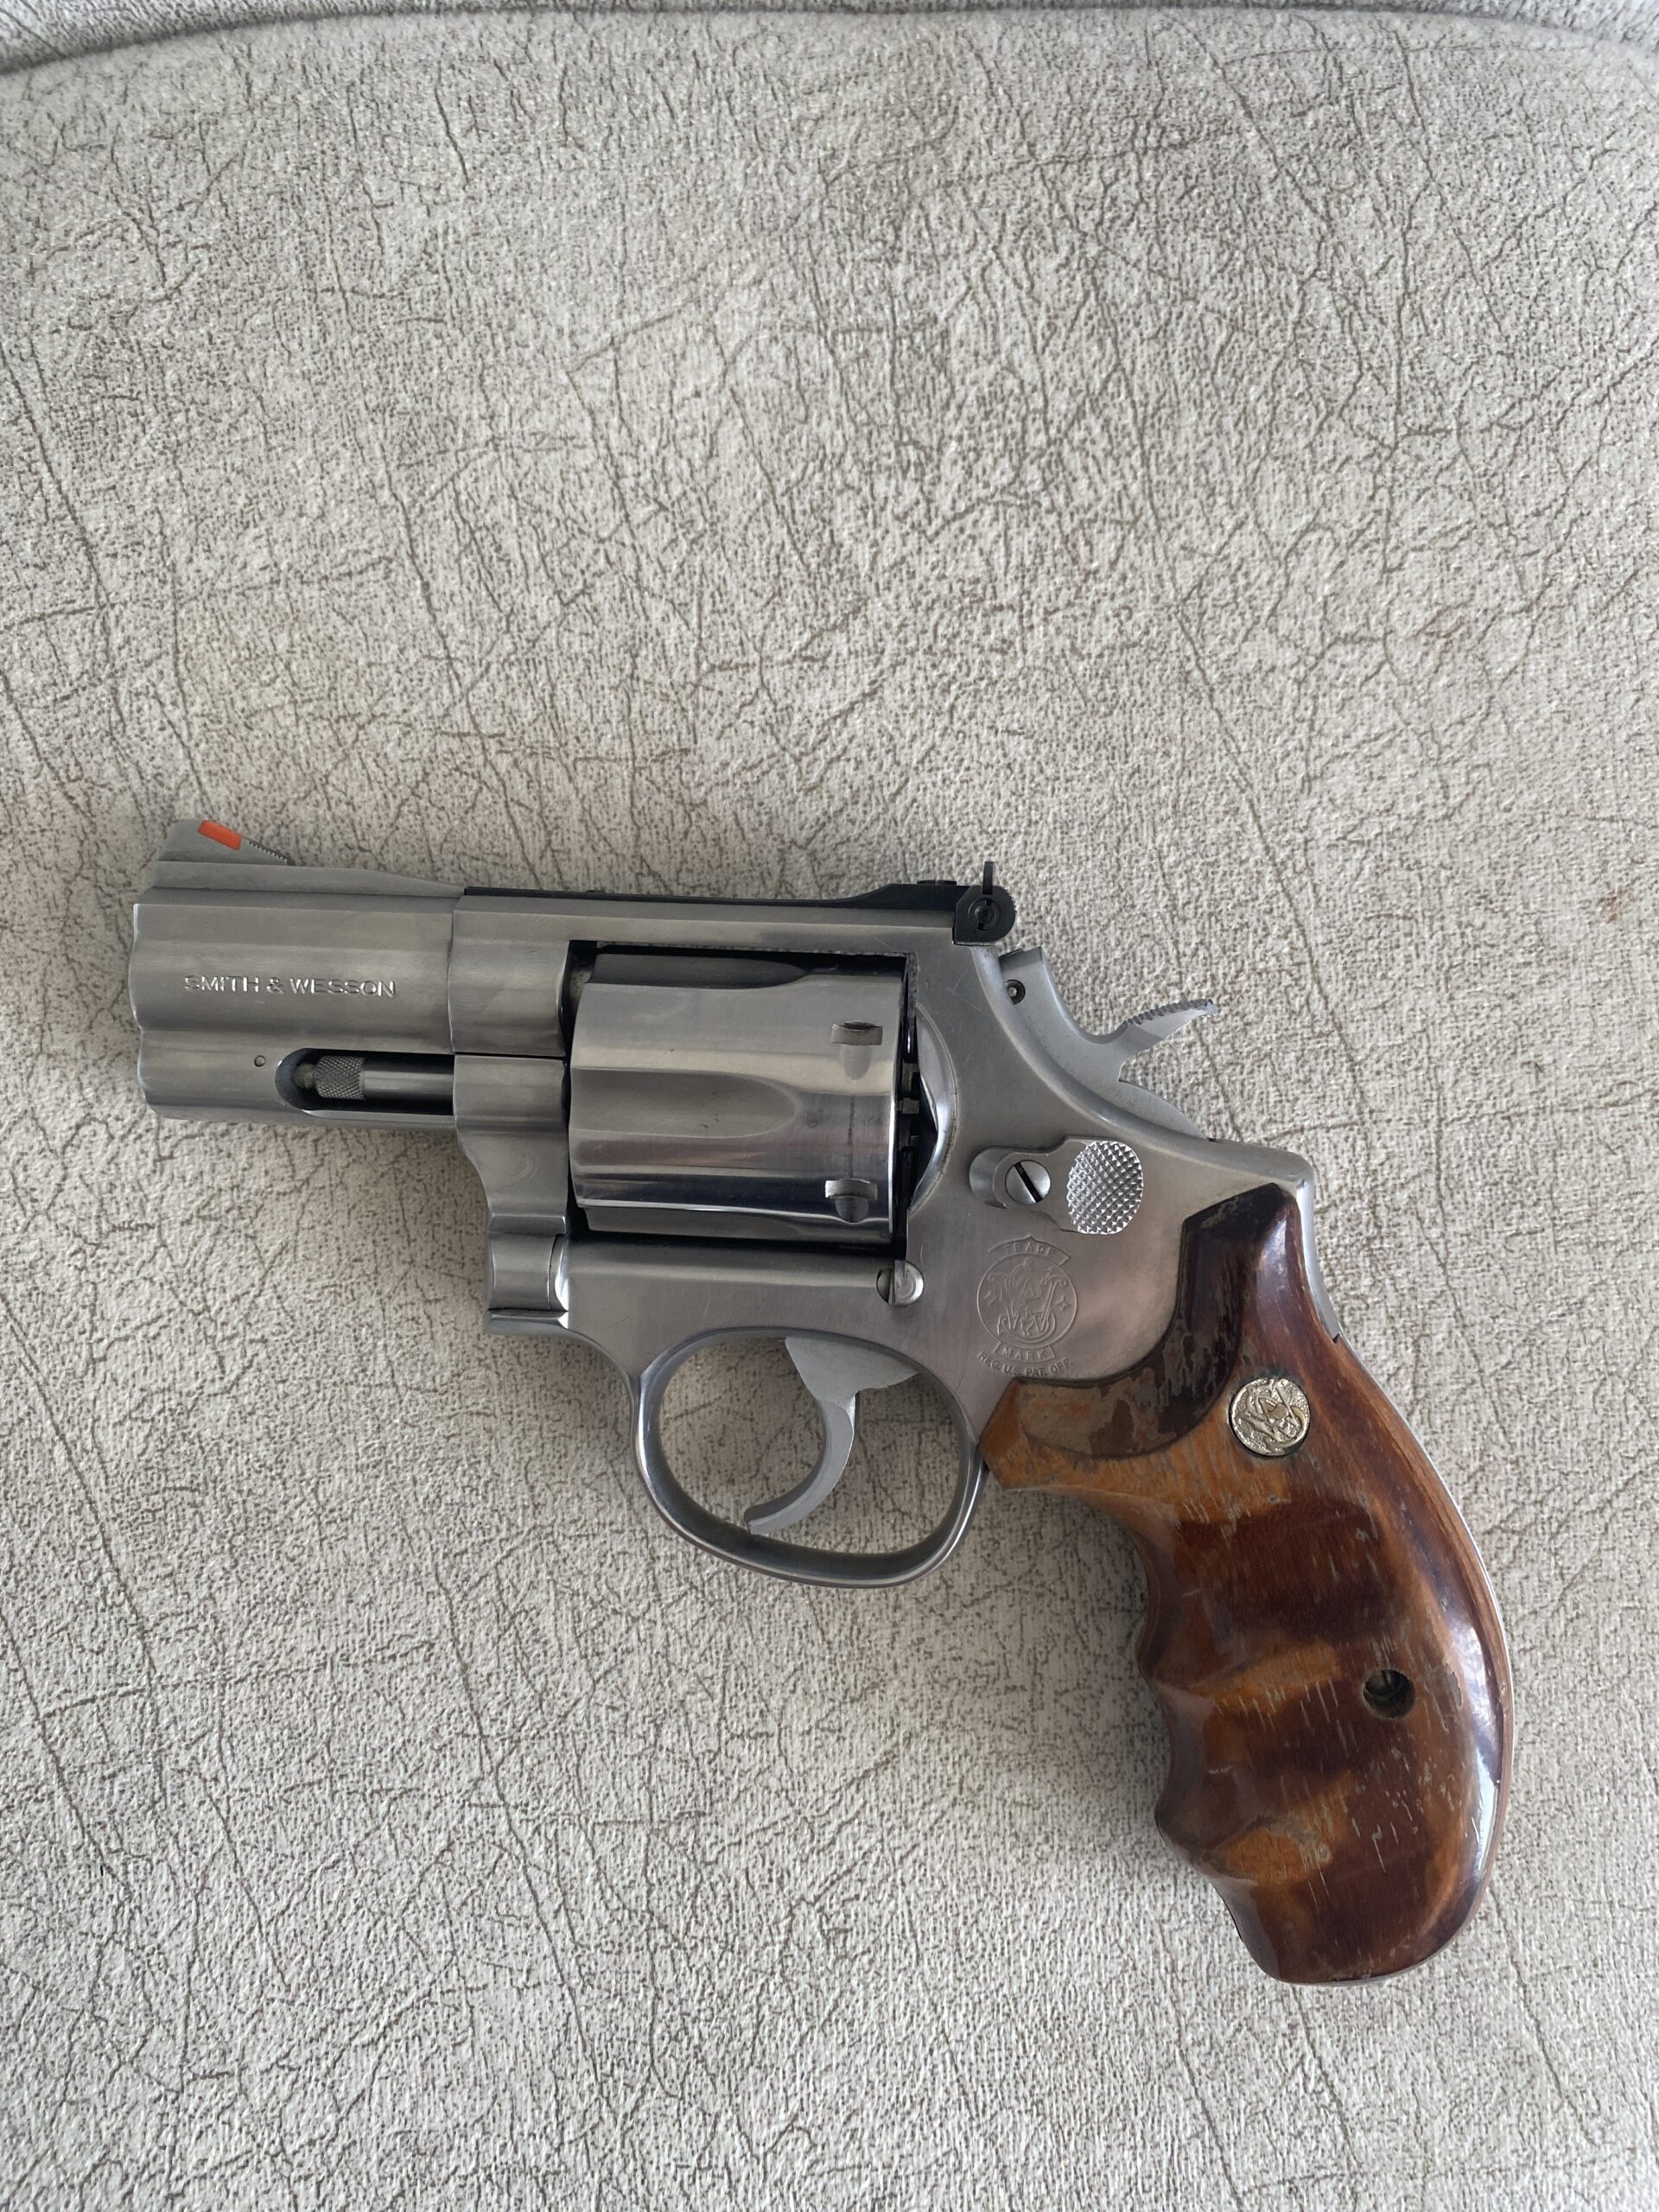 Smith & wesson 357 magnum